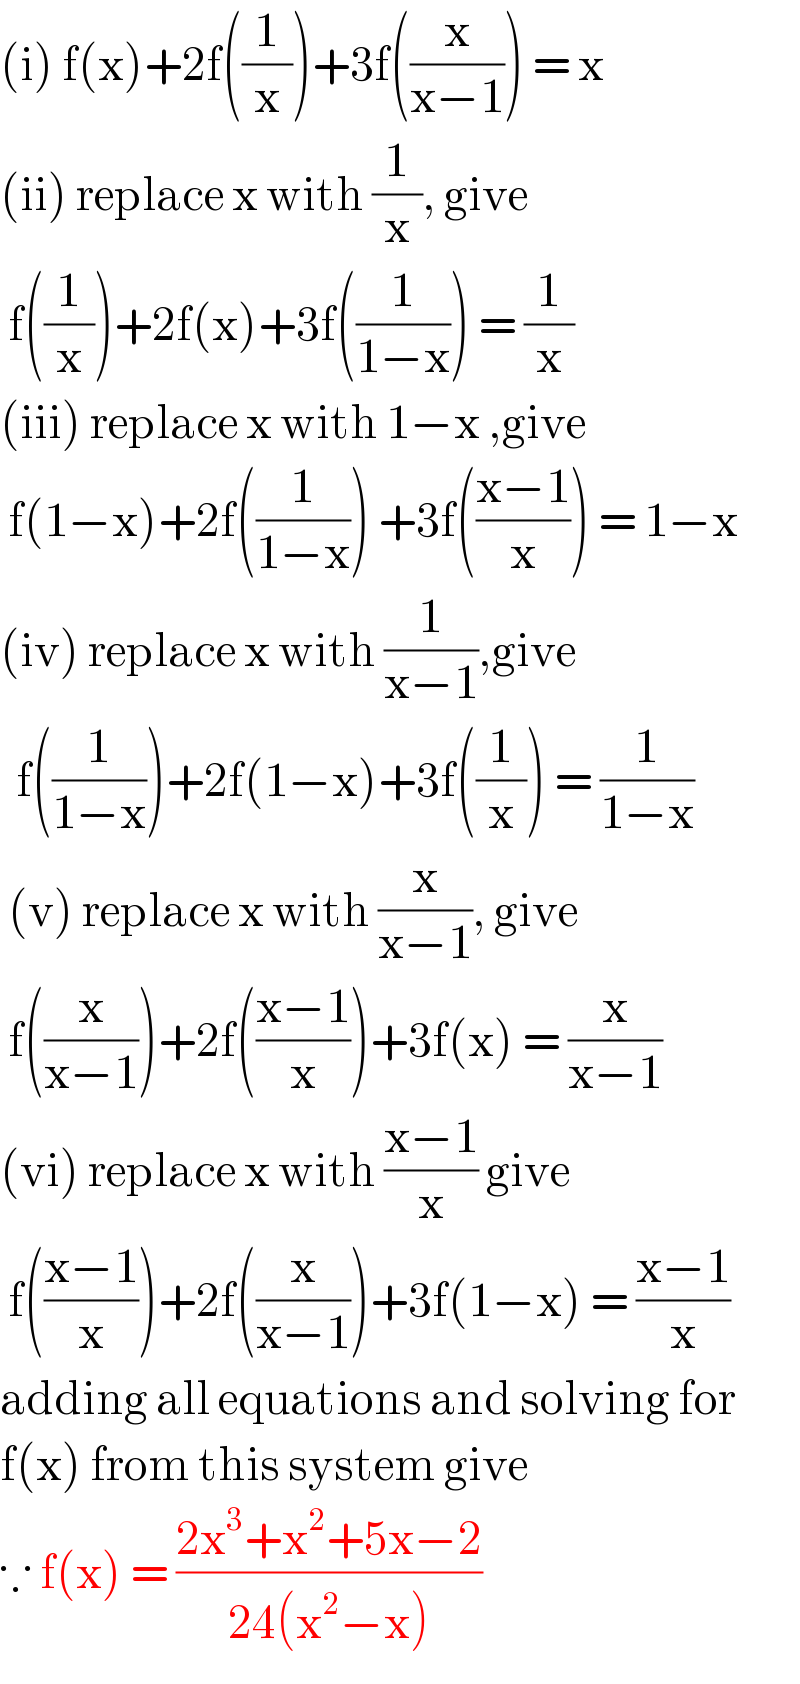 (i) f(x)+2f((1/x))+3f((x/(x−1))) = x  (ii) replace x with (1/x), give   f((1/x))+2f(x)+3f((1/(1−x))) = (1/x)  (iii) replace x with 1−x ,give   f(1−x)+2f((1/(1−x))) +3f(((x−1)/x)) = 1−x  (iv) replace x with (1/(x−1)),give     f((1/(1−x)))+2f(1−x)+3f((1/x)) = (1/(1−x))   (v) replace x with (x/(x−1)), give    f((x/(x−1)))+2f(((x−1)/x))+3f(x) = (x/(x−1))  (vi) replace x with ((x−1)/x) give    f(((x−1)/x))+2f((x/(x−1)))+3f(1−x) = ((x−1)/x)  adding all equations and solving for   f(x) from this system give   ∵ f(x) = ((2x^3 +x^2 +5x−2)/(24(x^2 −x)))  